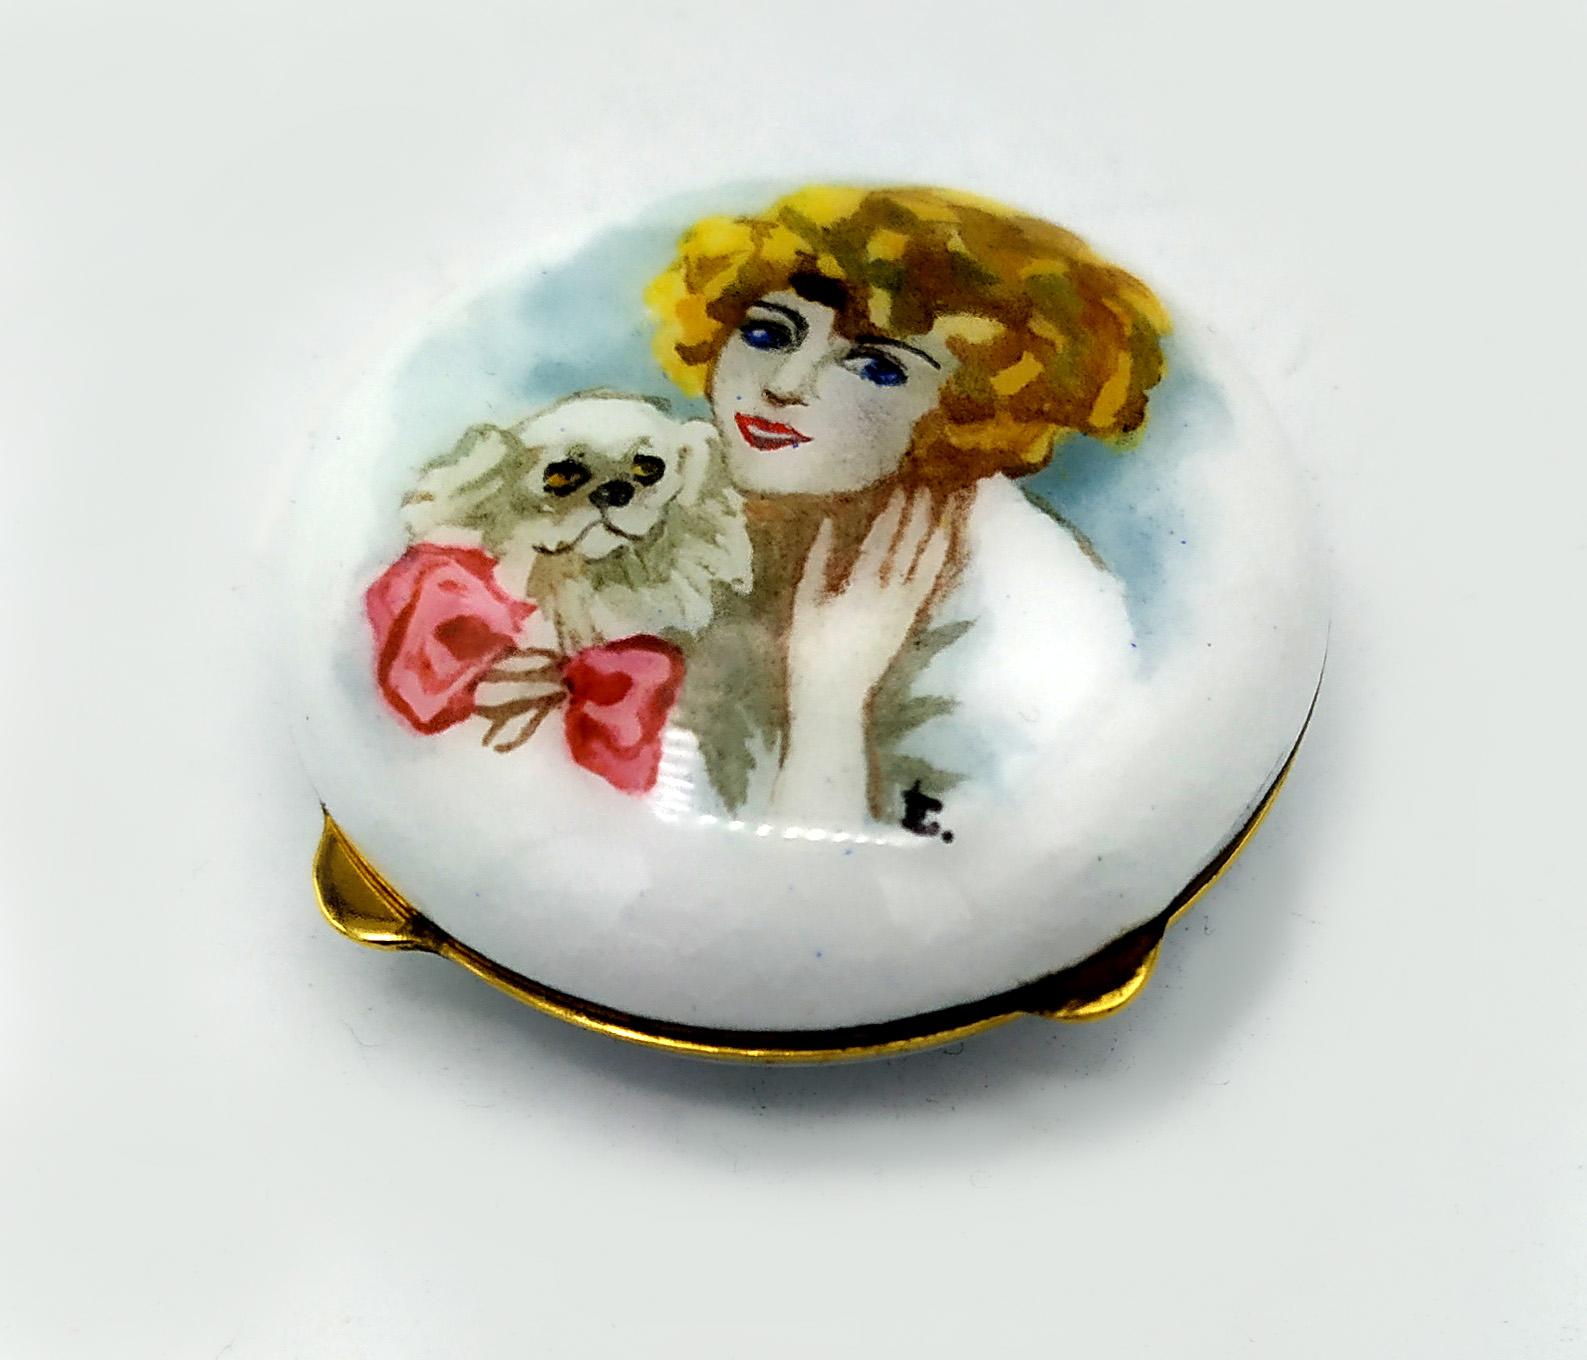 Domed round 925/1000 sterling silver gold plated pillbox with fire enamels above and below, and hand-painted miniature of a lady with small dog, in Viennese Art Nouveau style second half of the 19th century. Size diameter cm. 4.2 height cm. 1.8.